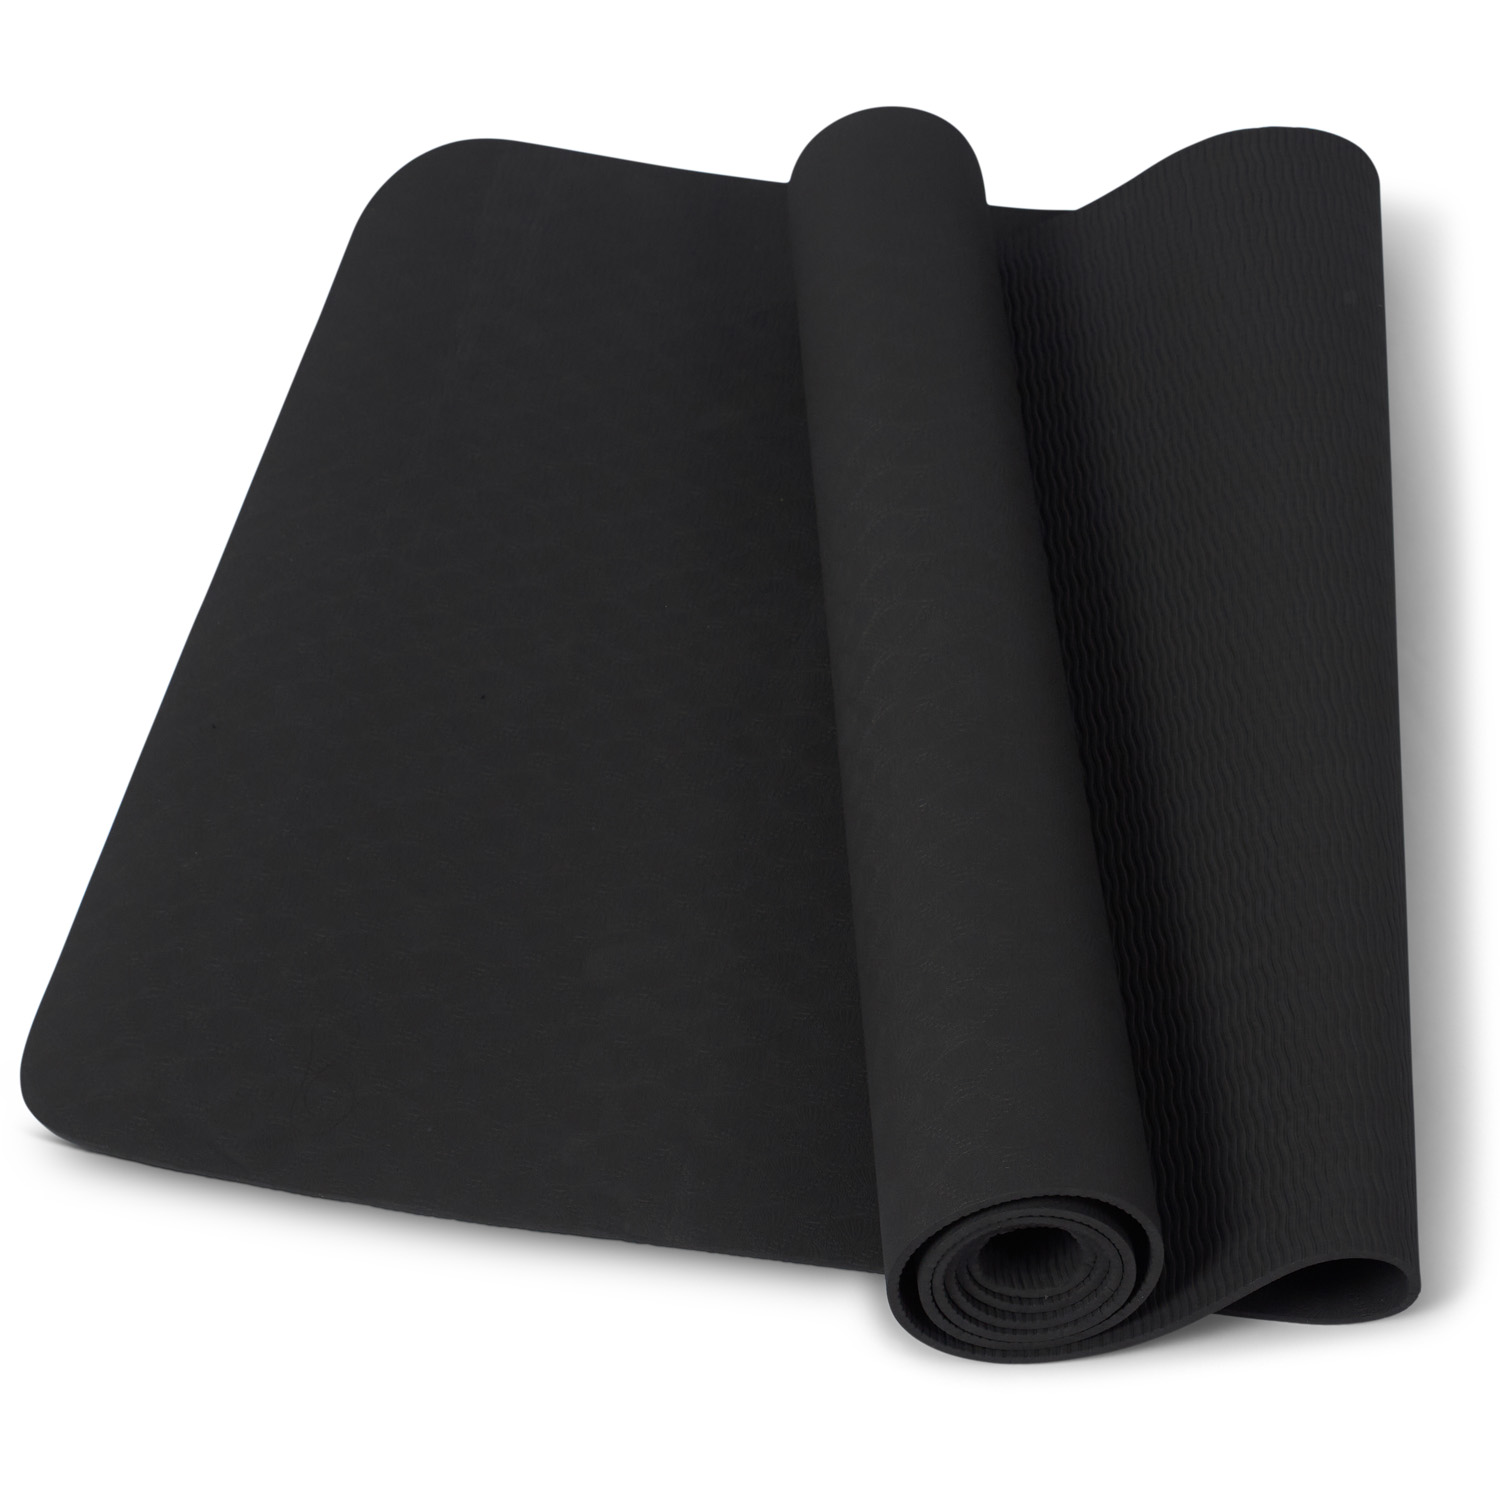 Gladiator Sports Fitness and Yoga Mat